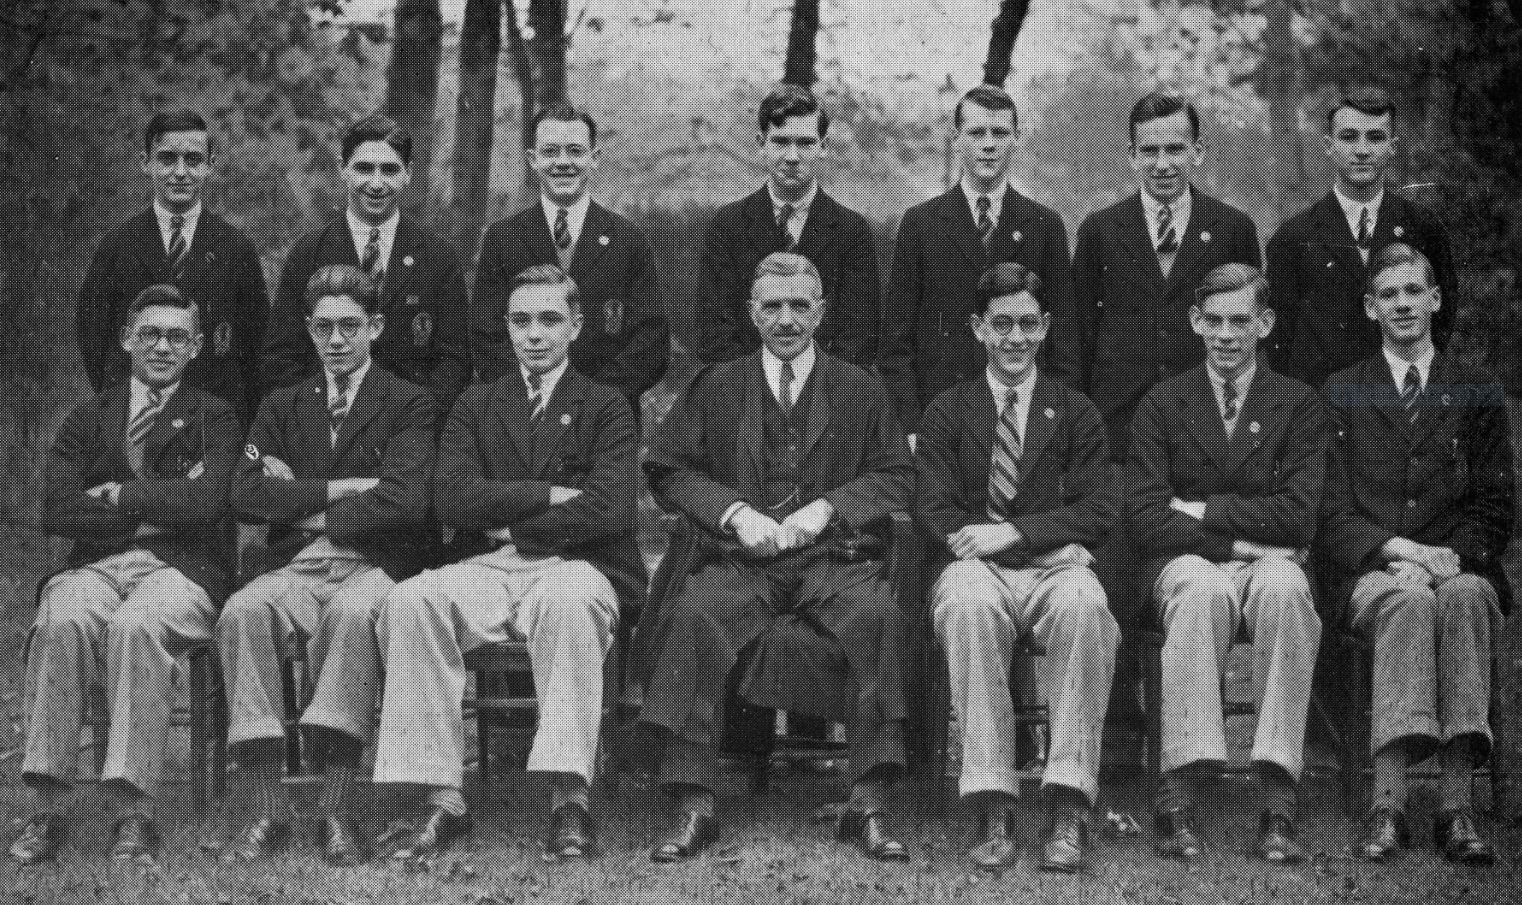 Photograph of School Prefects 1936/36